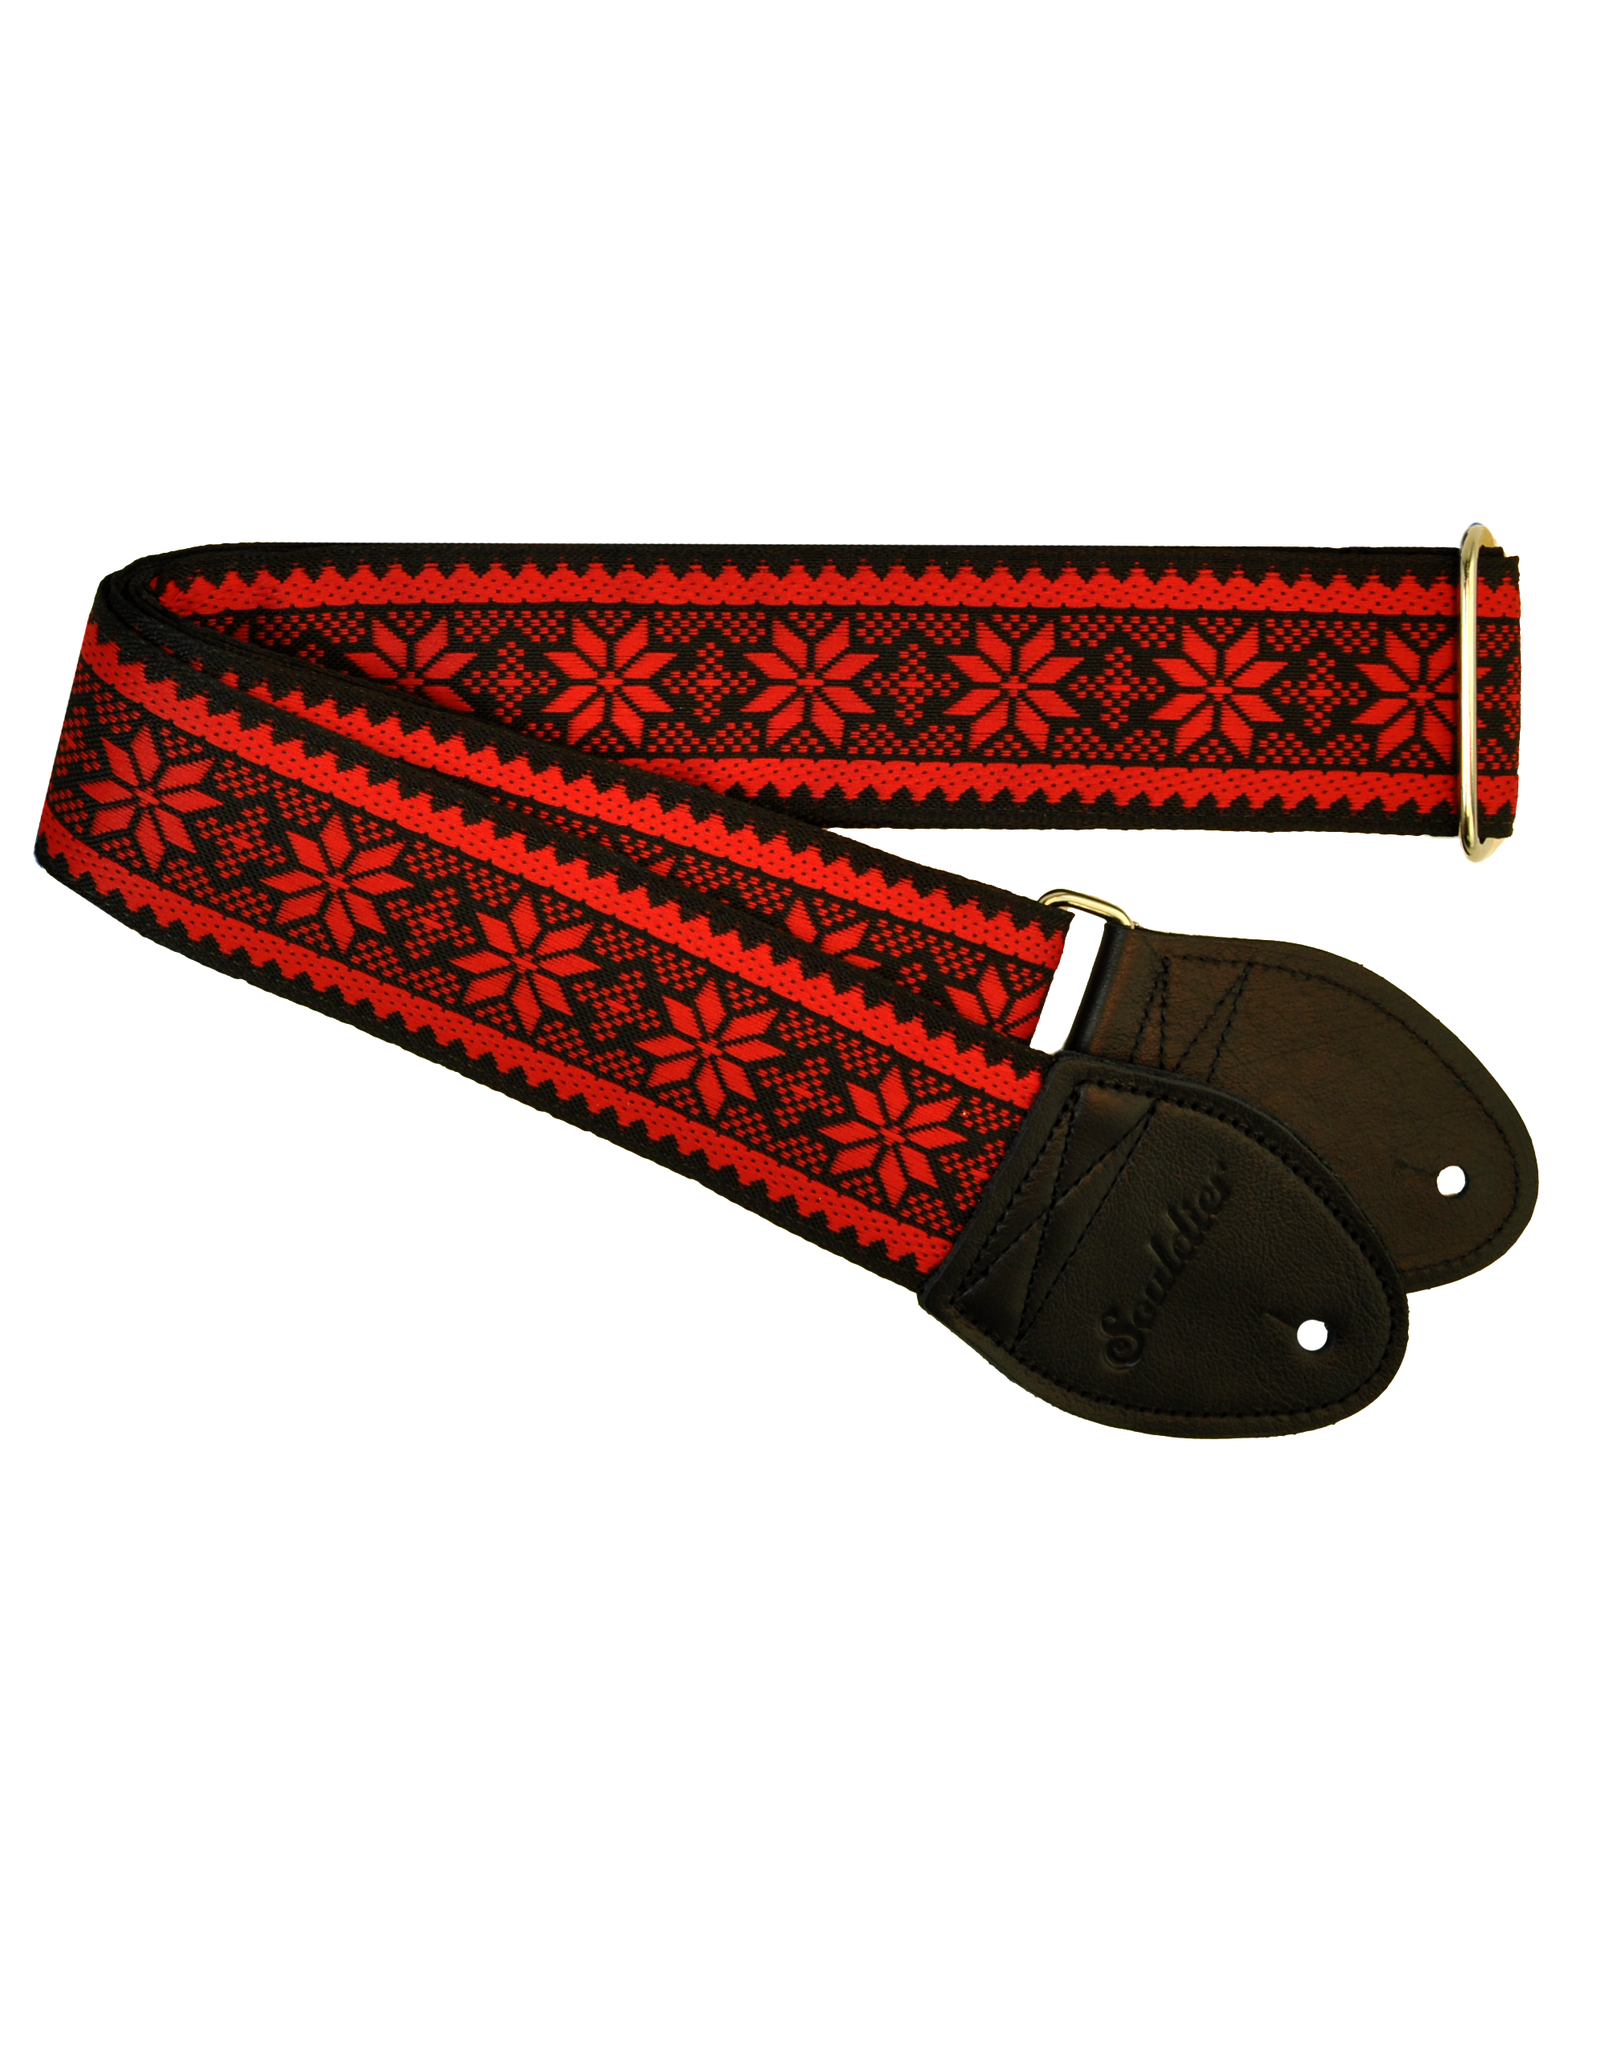 Souldier Souldier Poinsettia Red on Black, Vintage Fabric Guitar Strap